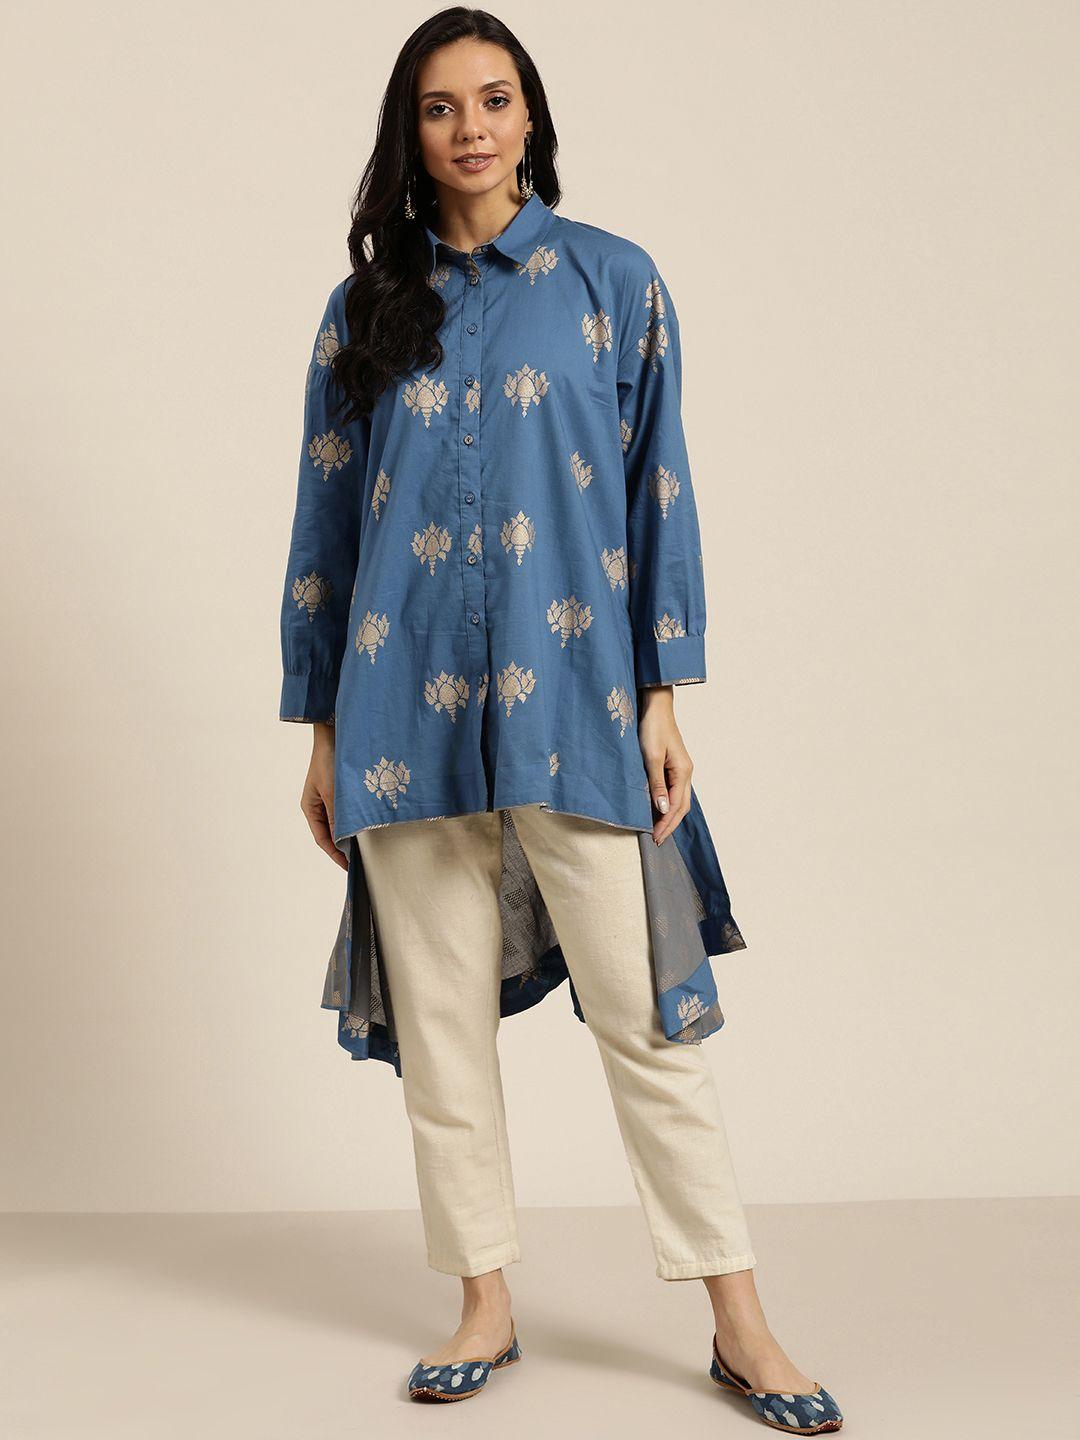 sangria women blue & golden printed shirt style high low pure cotton top